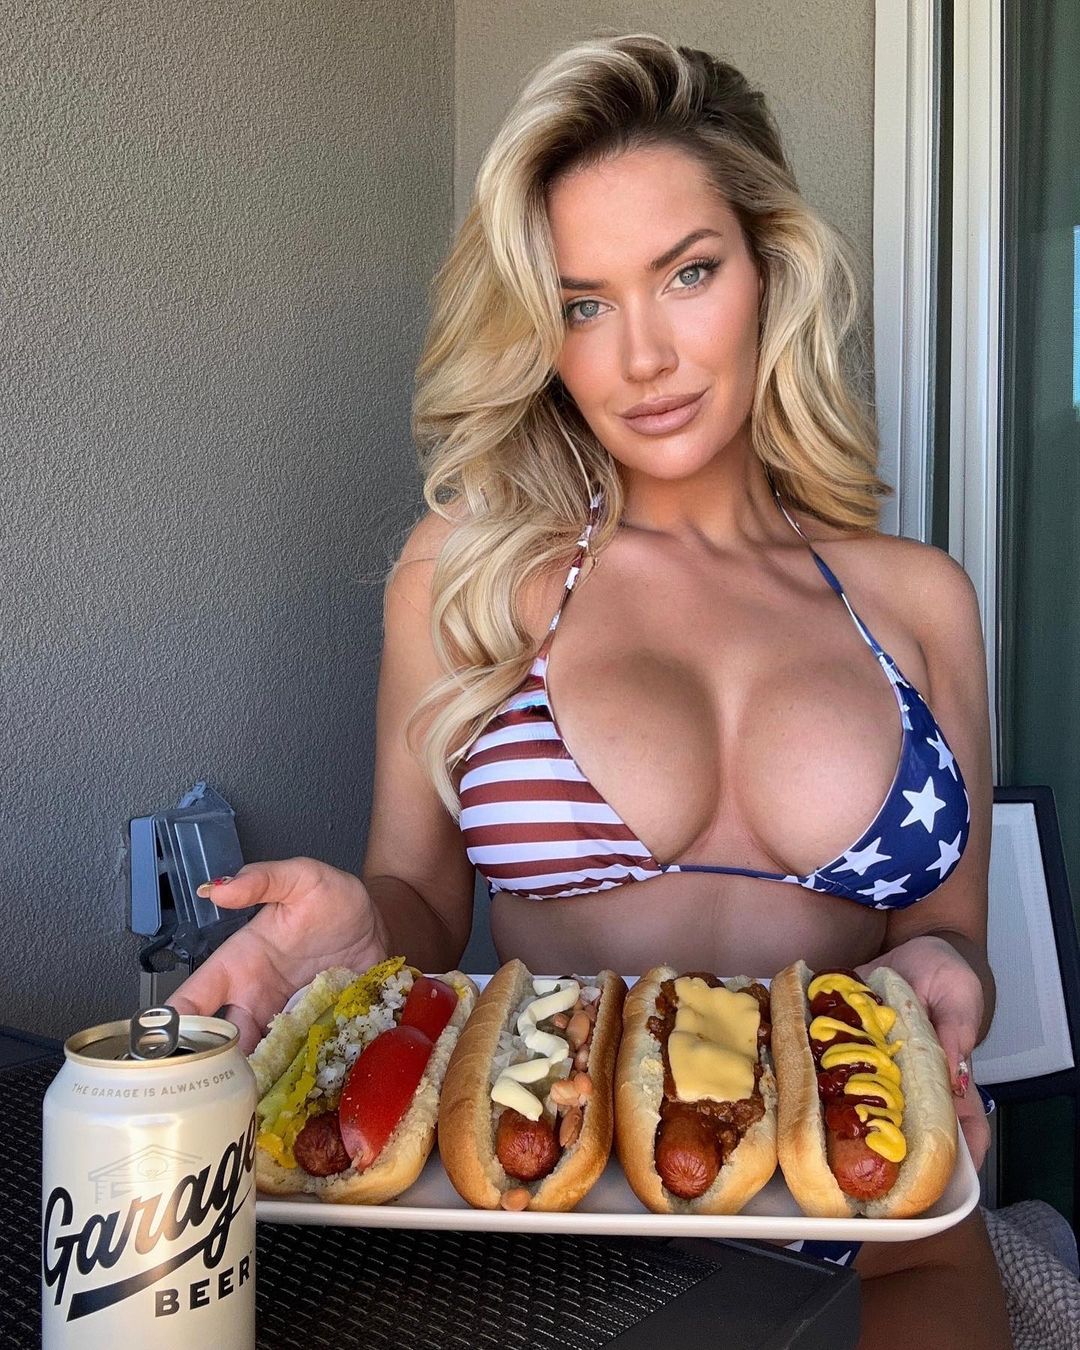 Paige celebrated the US Open in a stars and stripes bikini, eating hot dogs